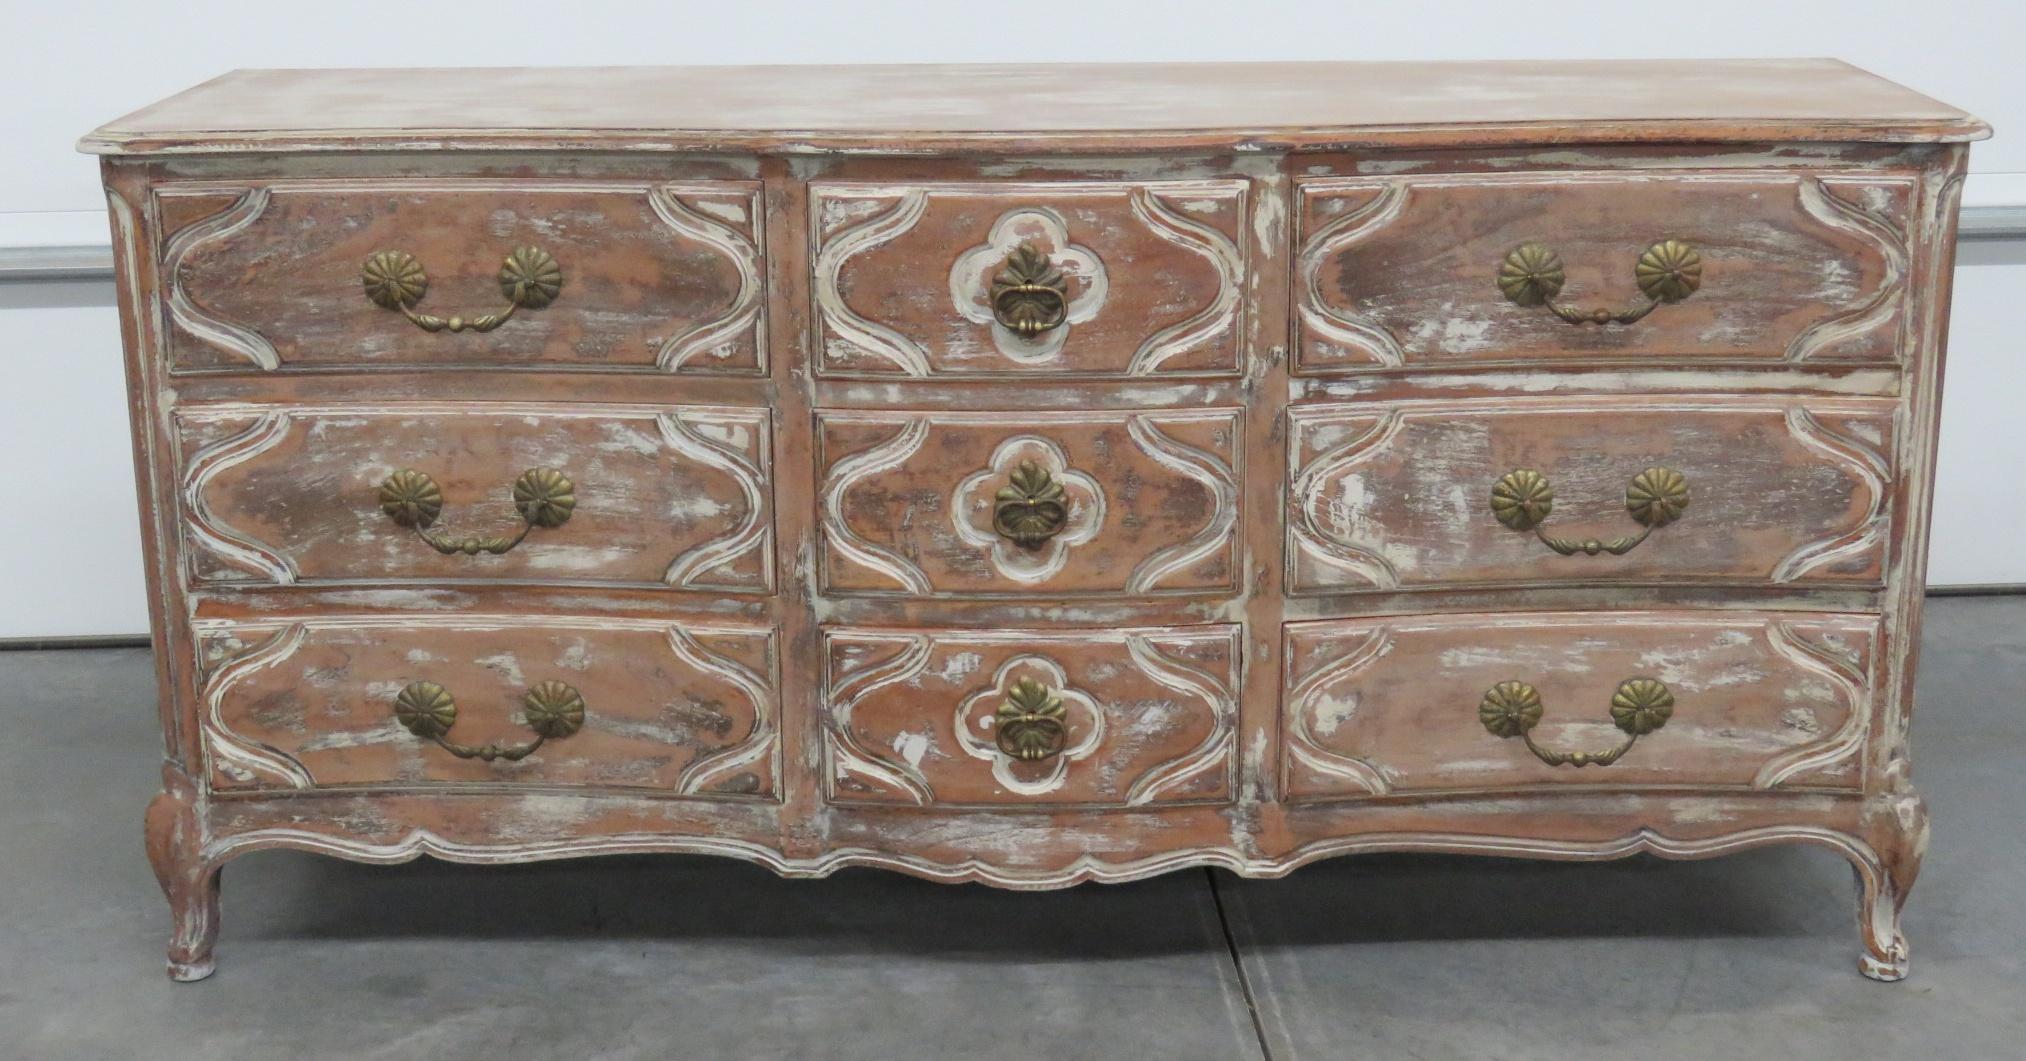 Auffray Country French 9-drawer distressed painted dresser.